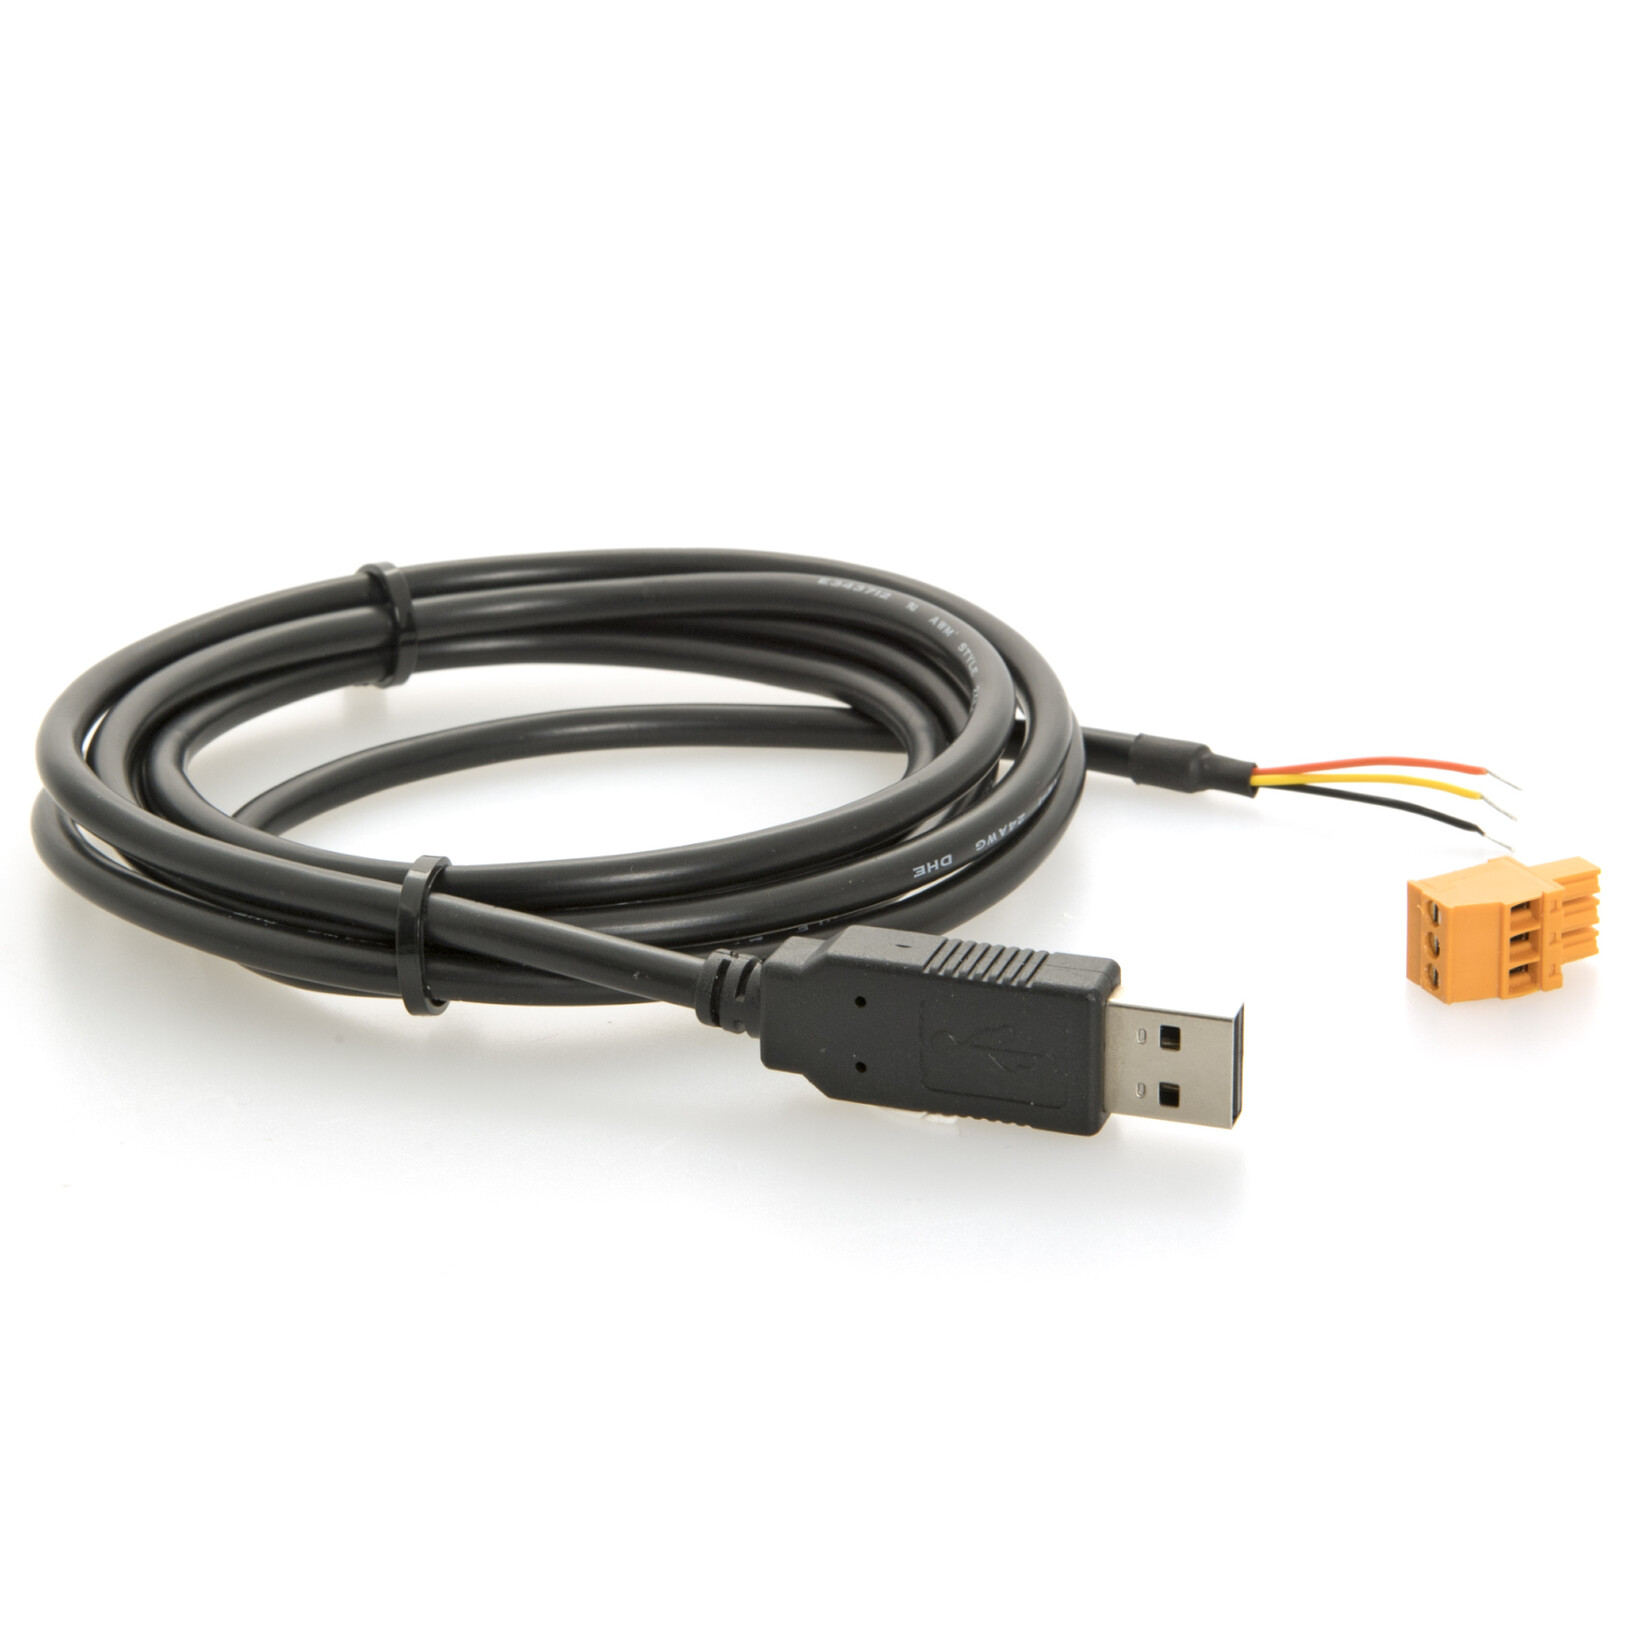 Actisense USB To Serial Adapter for use with PRO range products and EMU-1